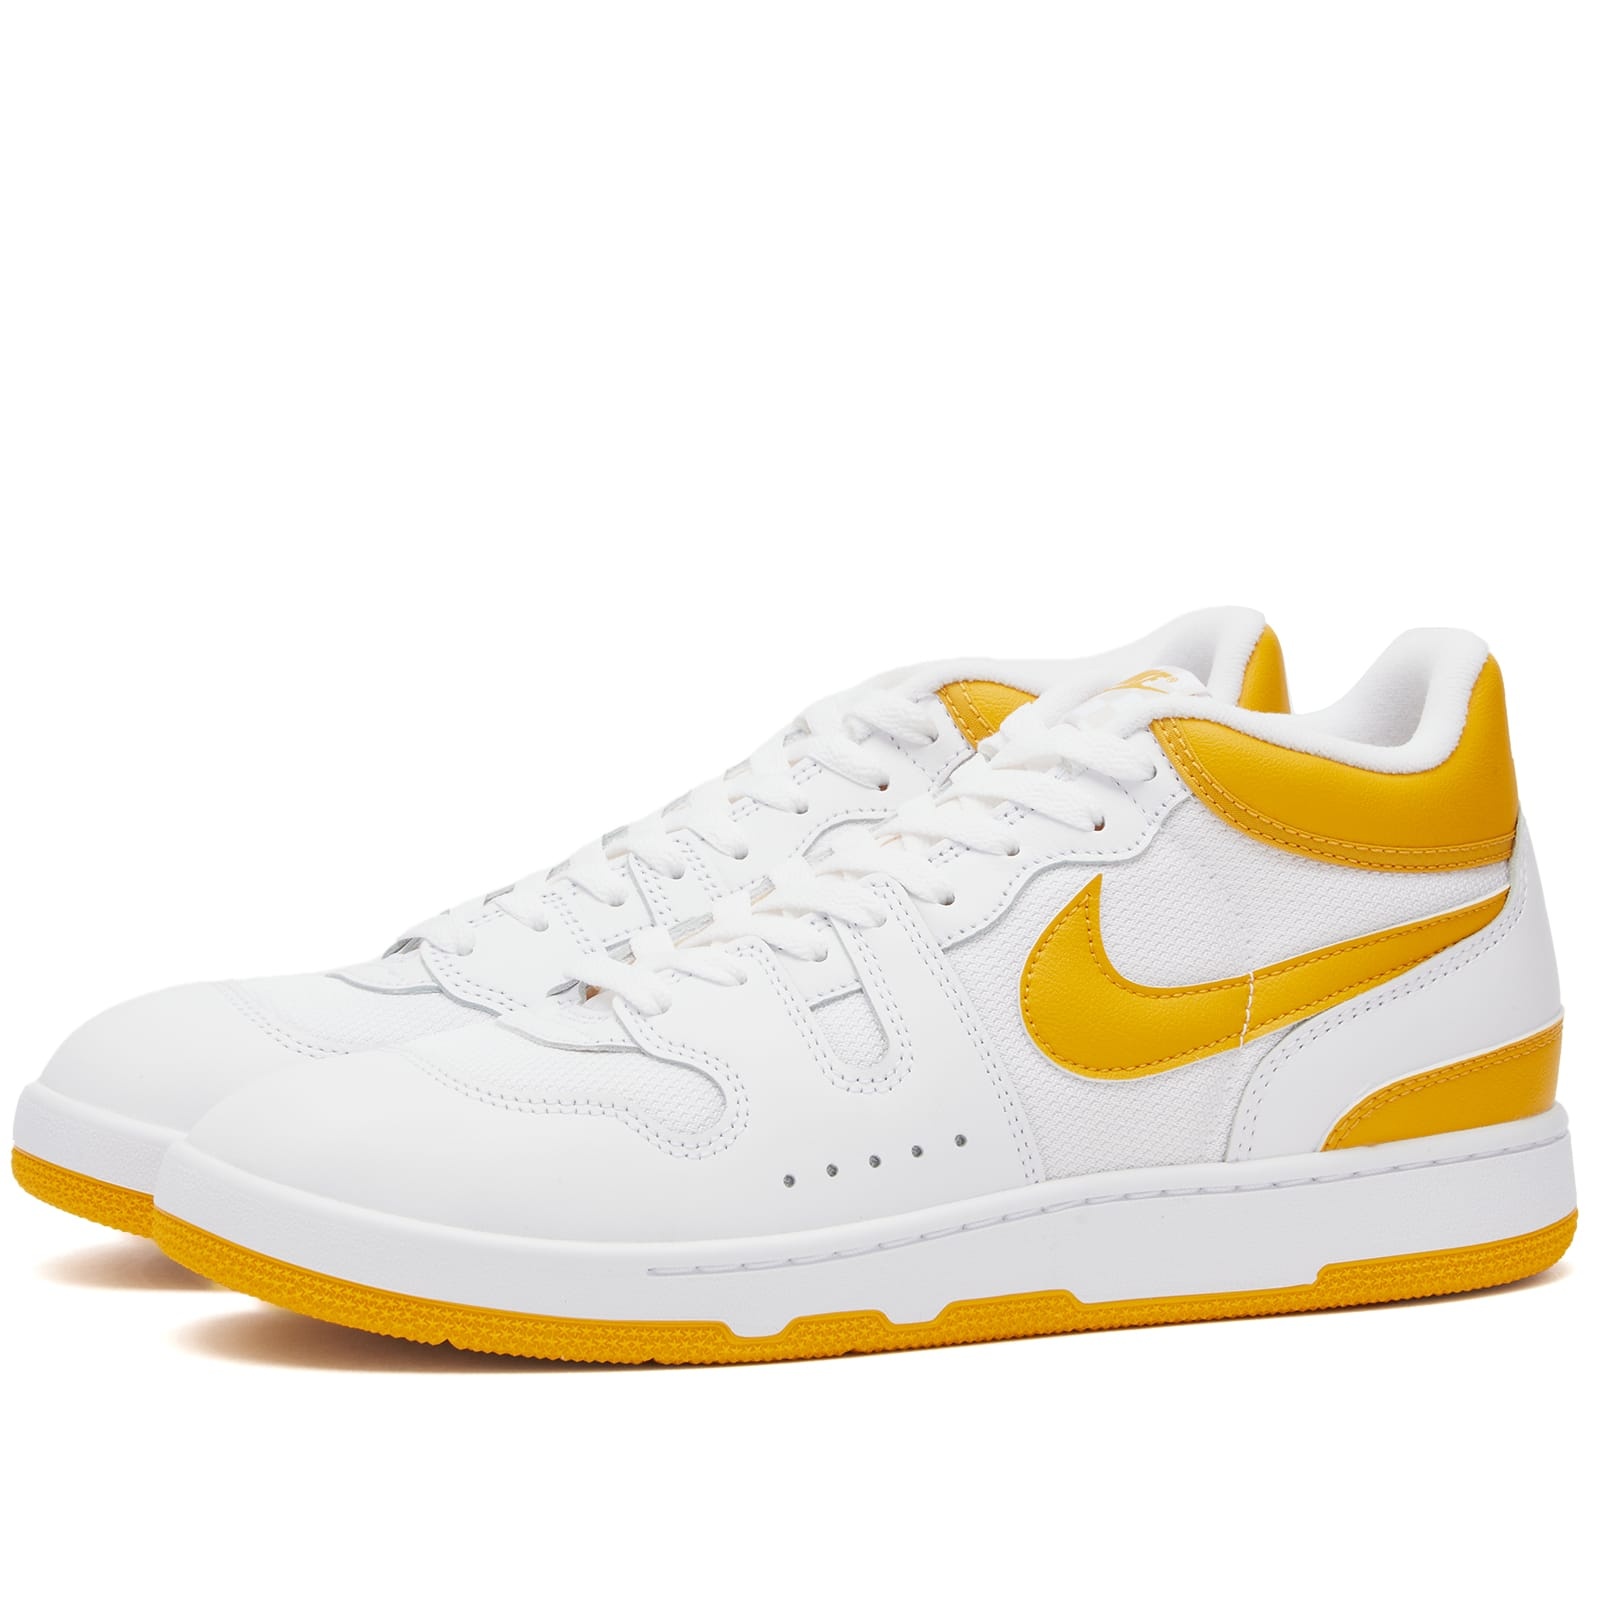 Nike Attack Qs SP - 1